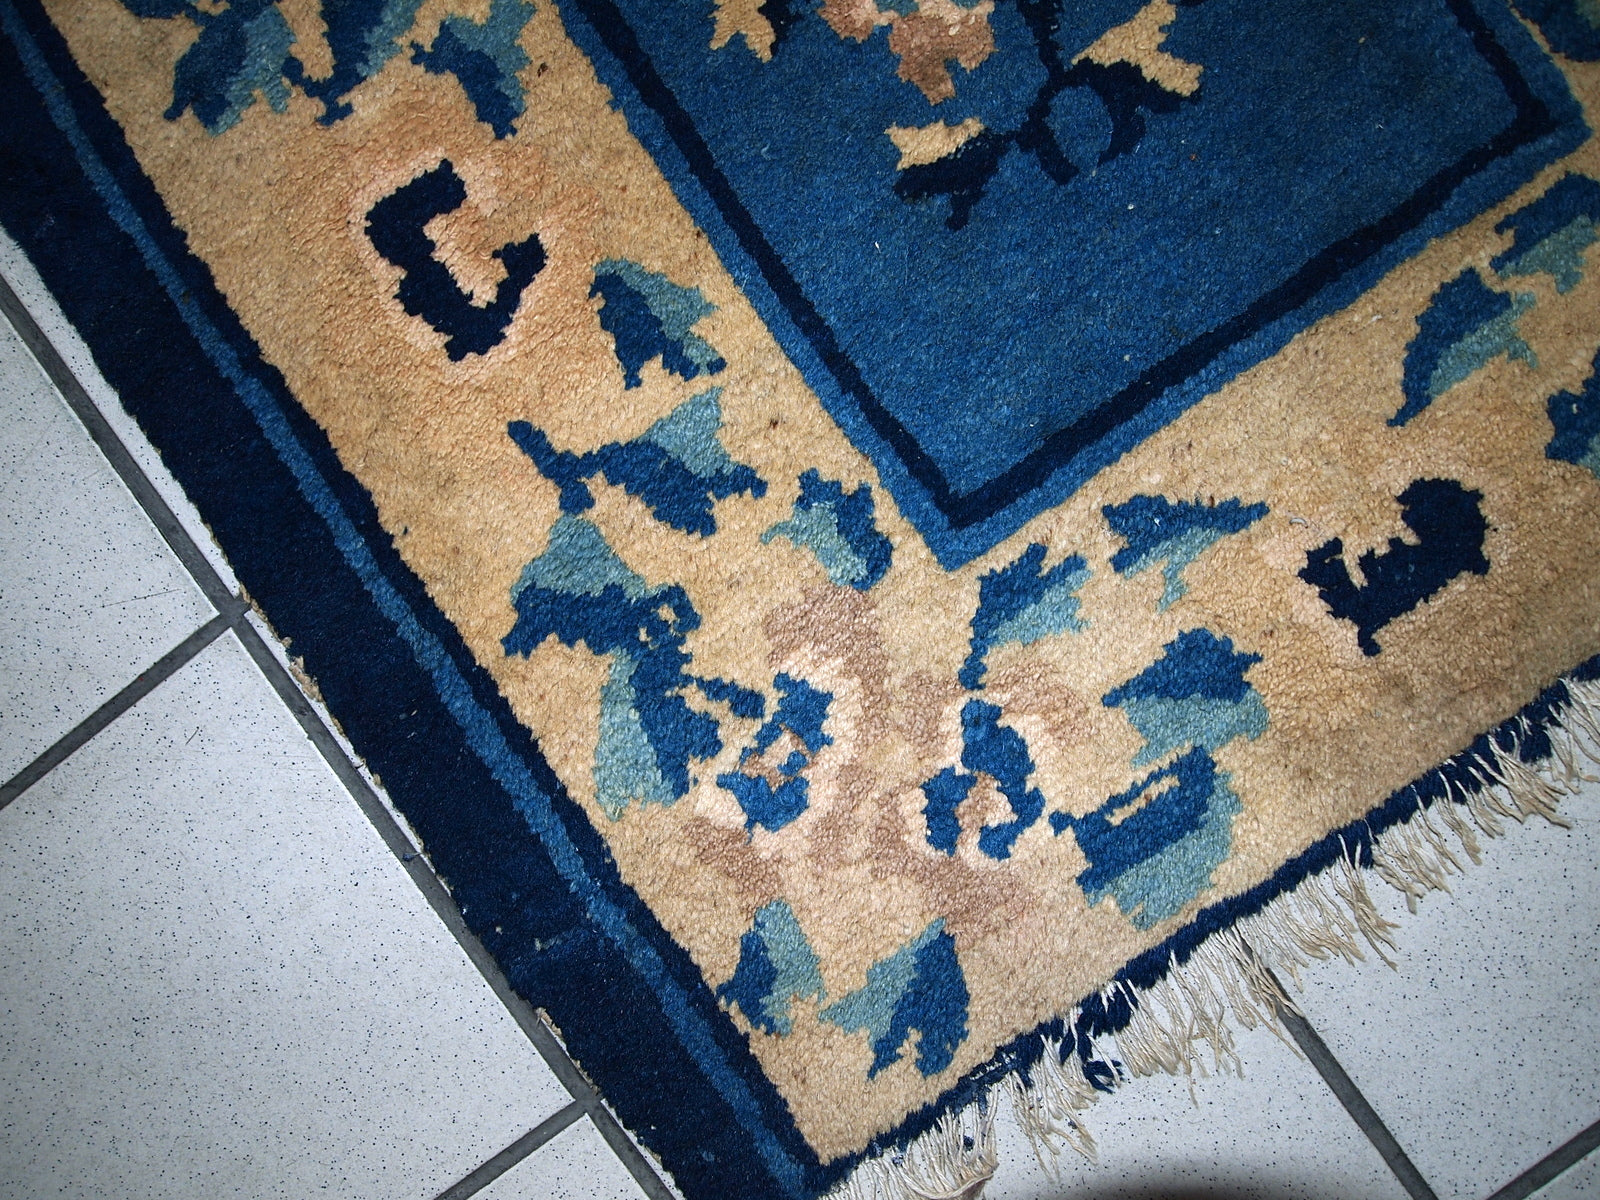 Close-up of the damaged parts on one end of the rug.